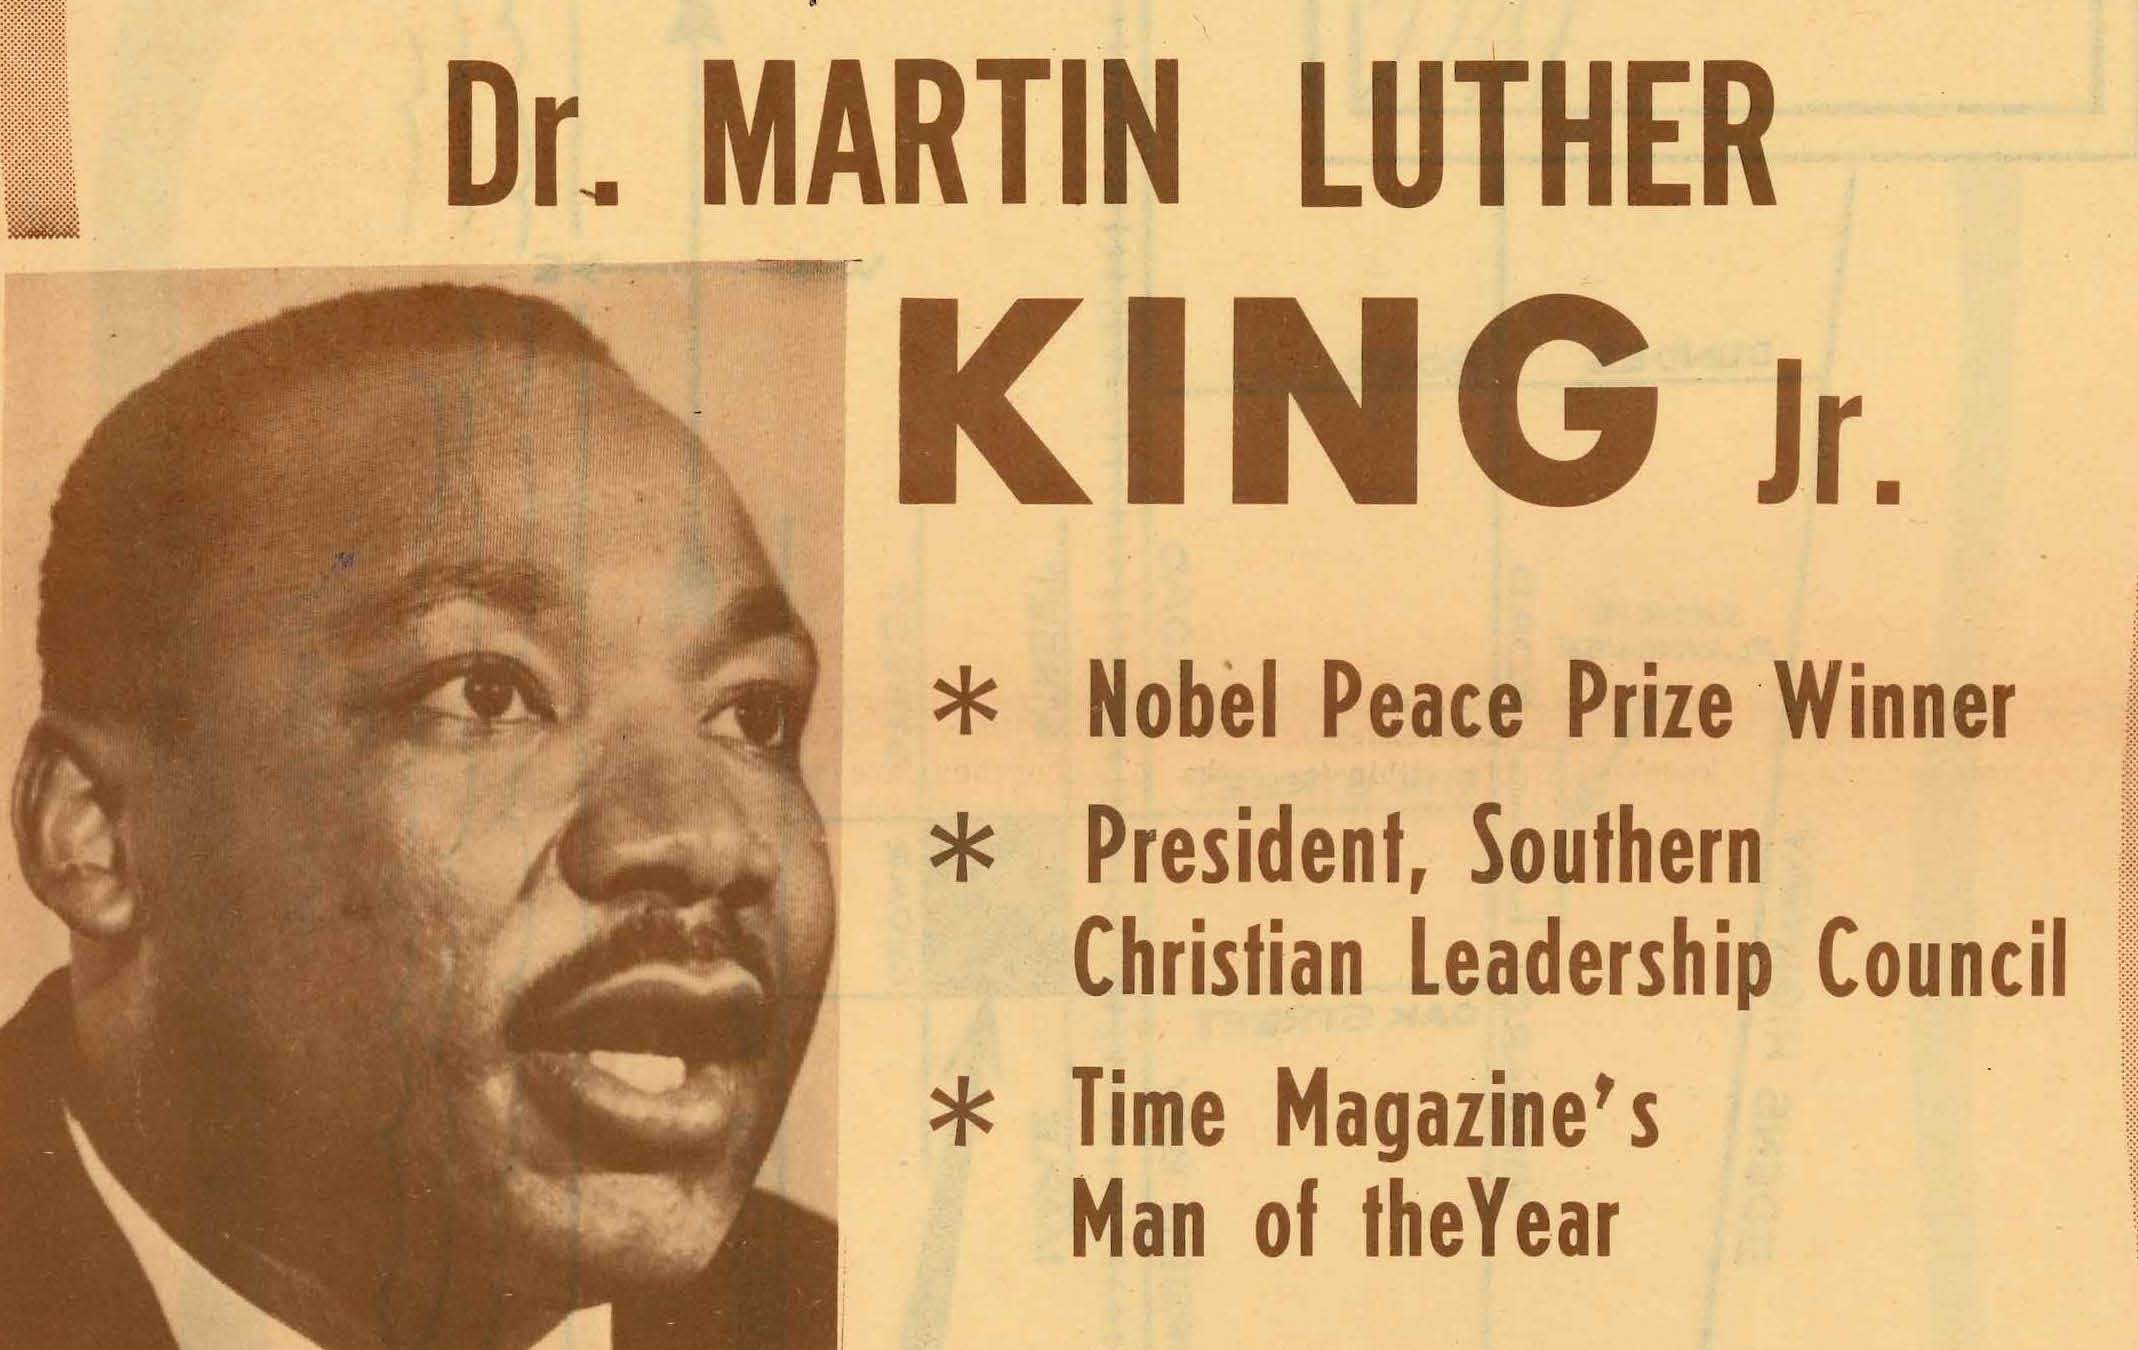 AFSC statement on the assassination of Martin Luther King Jr. 